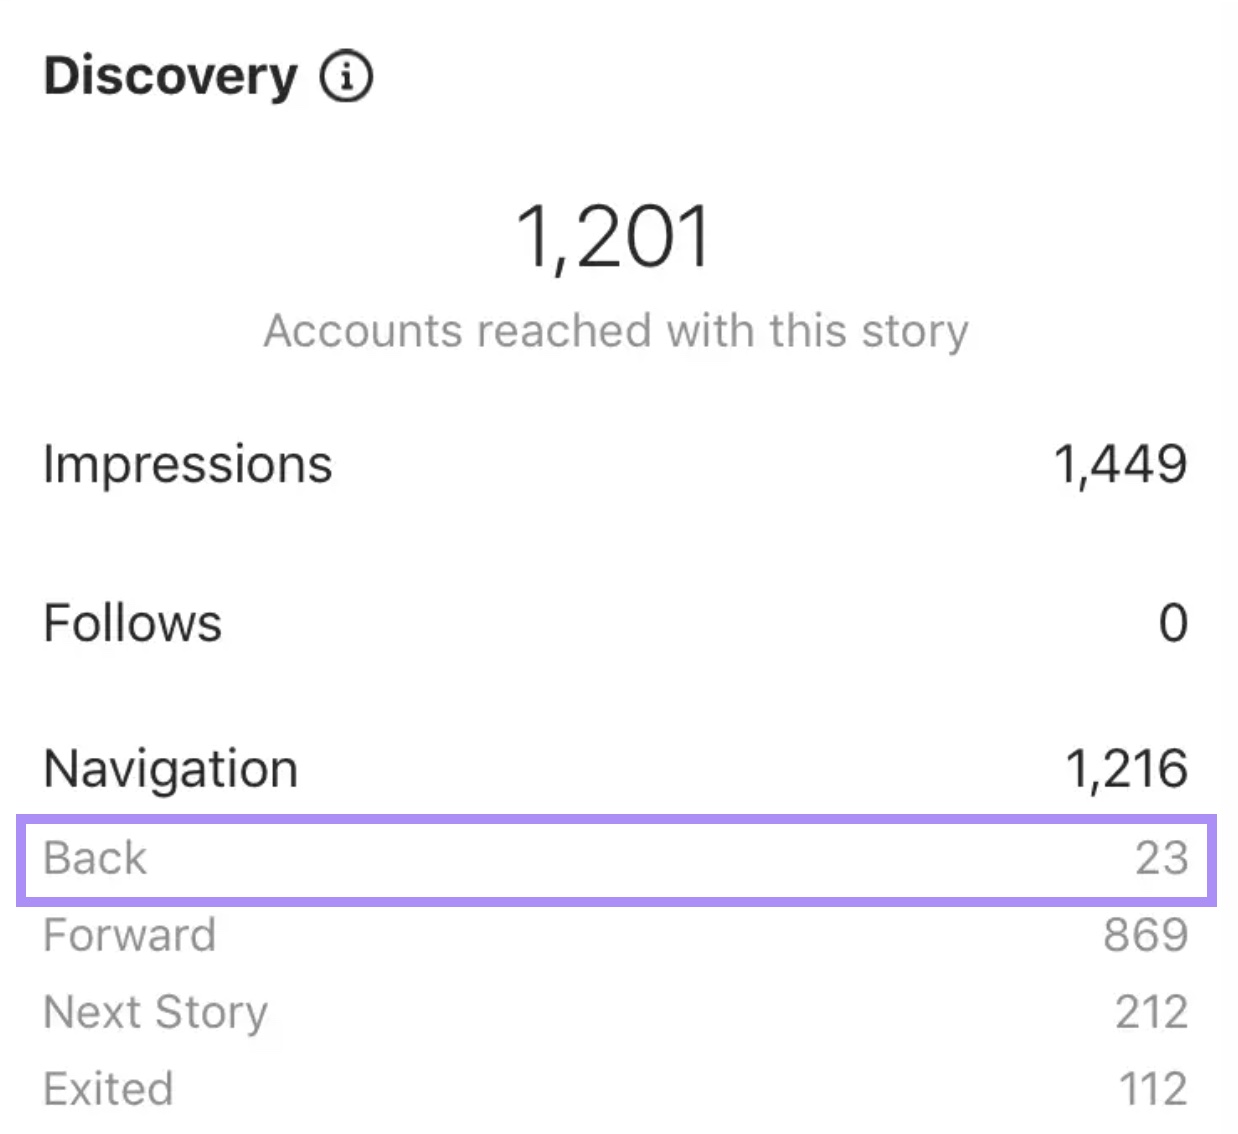 Instagram story metrics, with "back" interactions highlighted